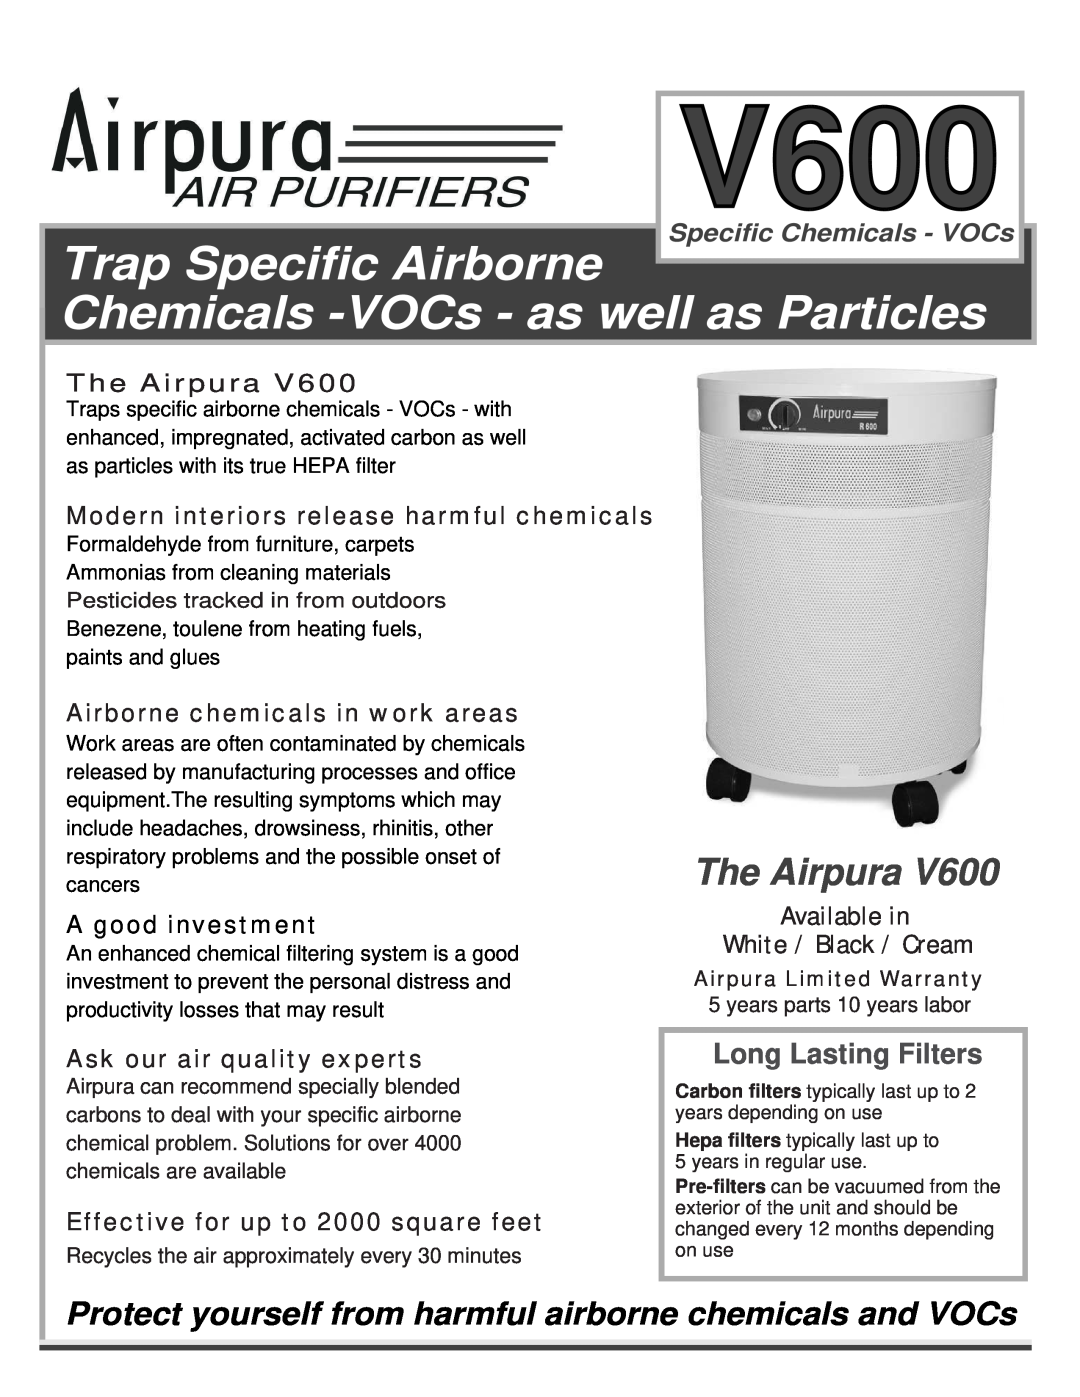 Airpura Industries Airpura V600 warranty Airpura Limited Warranty, Trap Specific Airborne, The Airpura, A good investment 